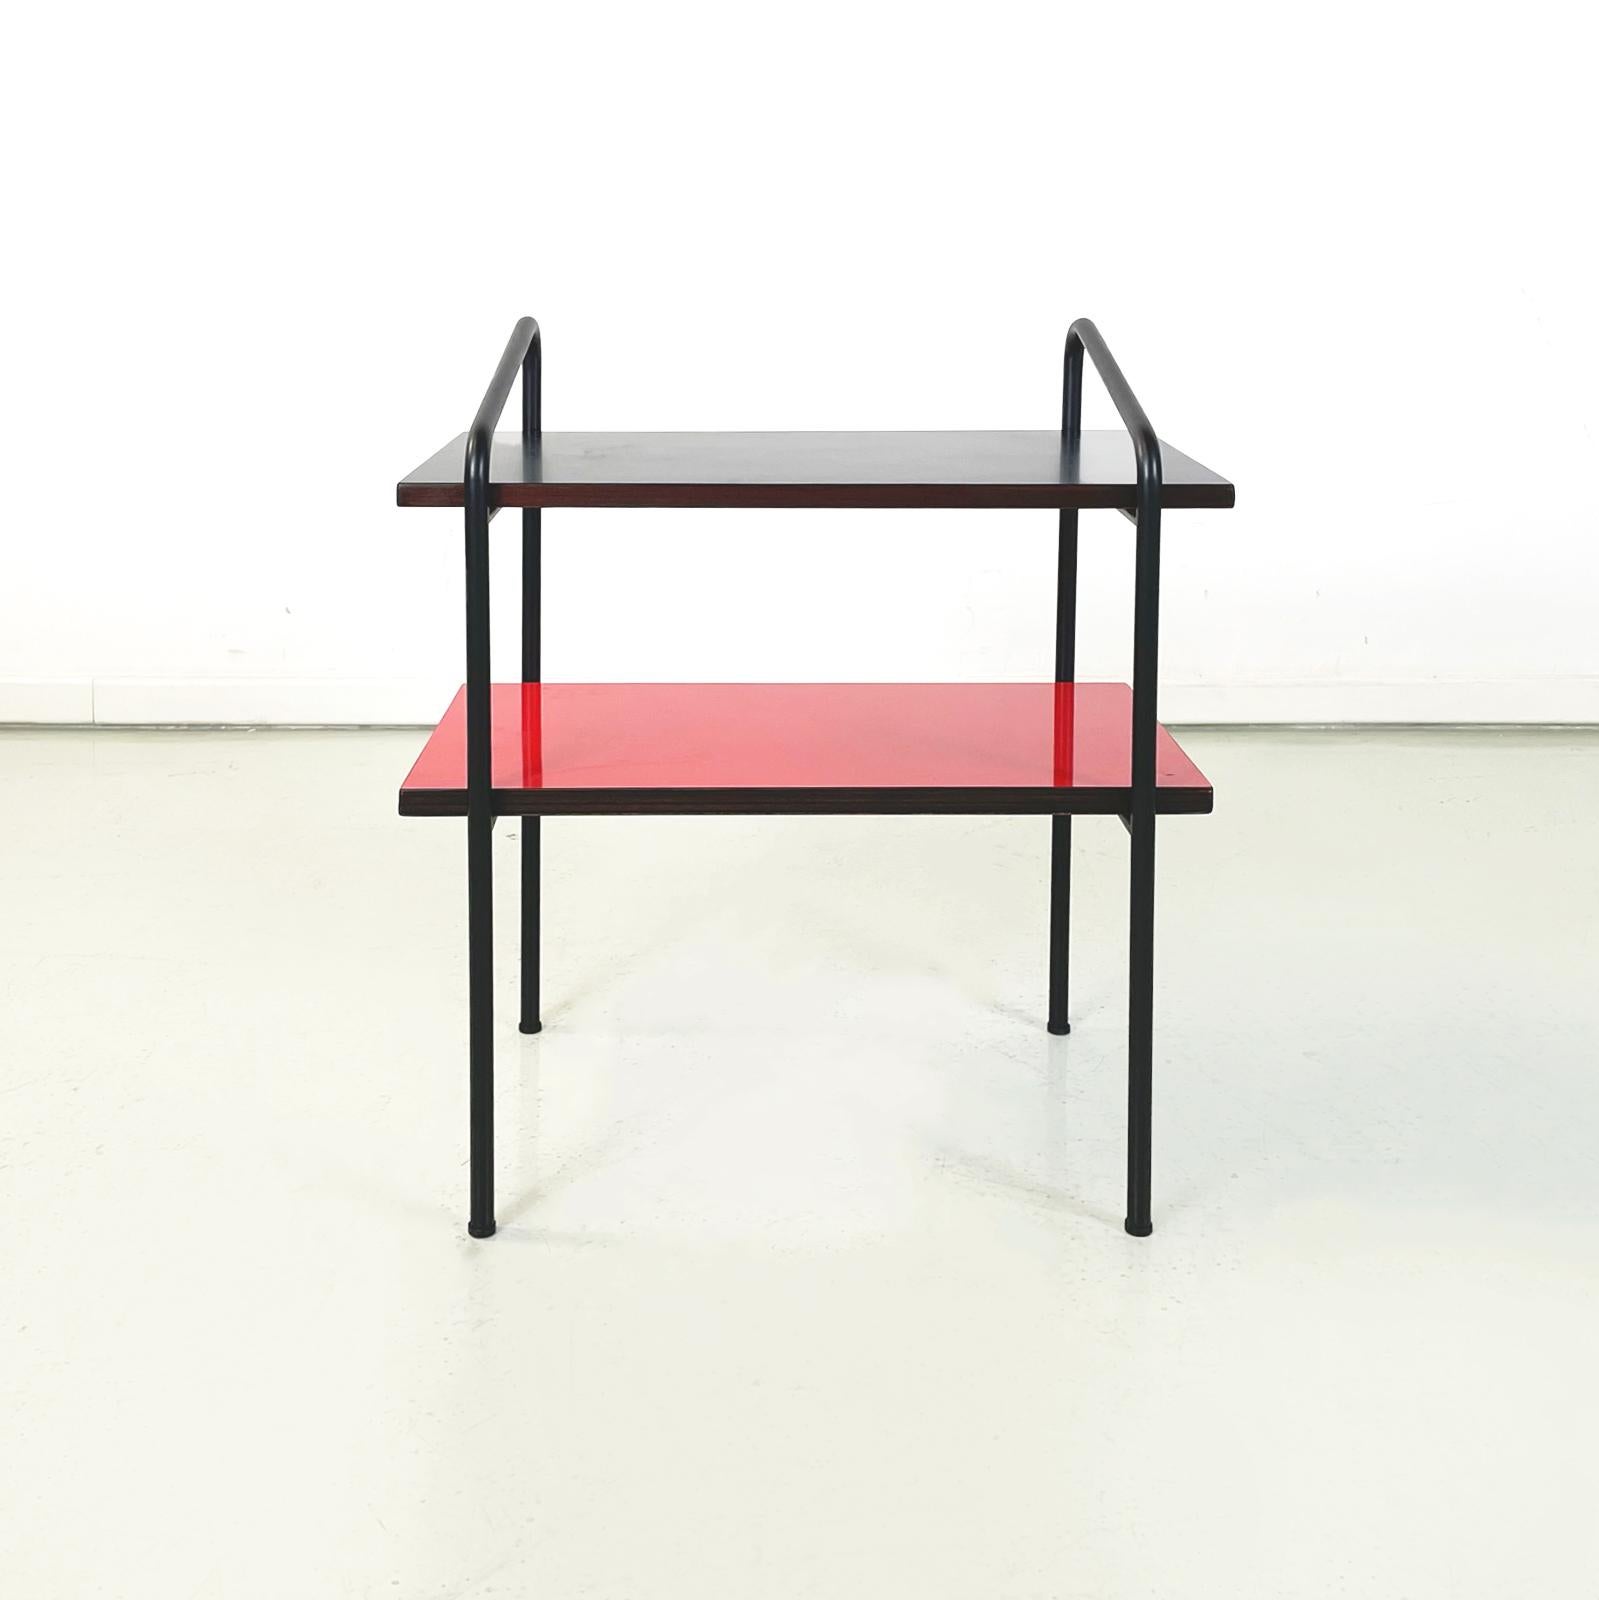 Italian modern Coffee table or bedside table in formica and black metal, 1960s
Coffee table with double shelf in formica with brown edge in walnut color. The upper shelf is in matte black, the lower shelf is in lacquered bright red. The structure is